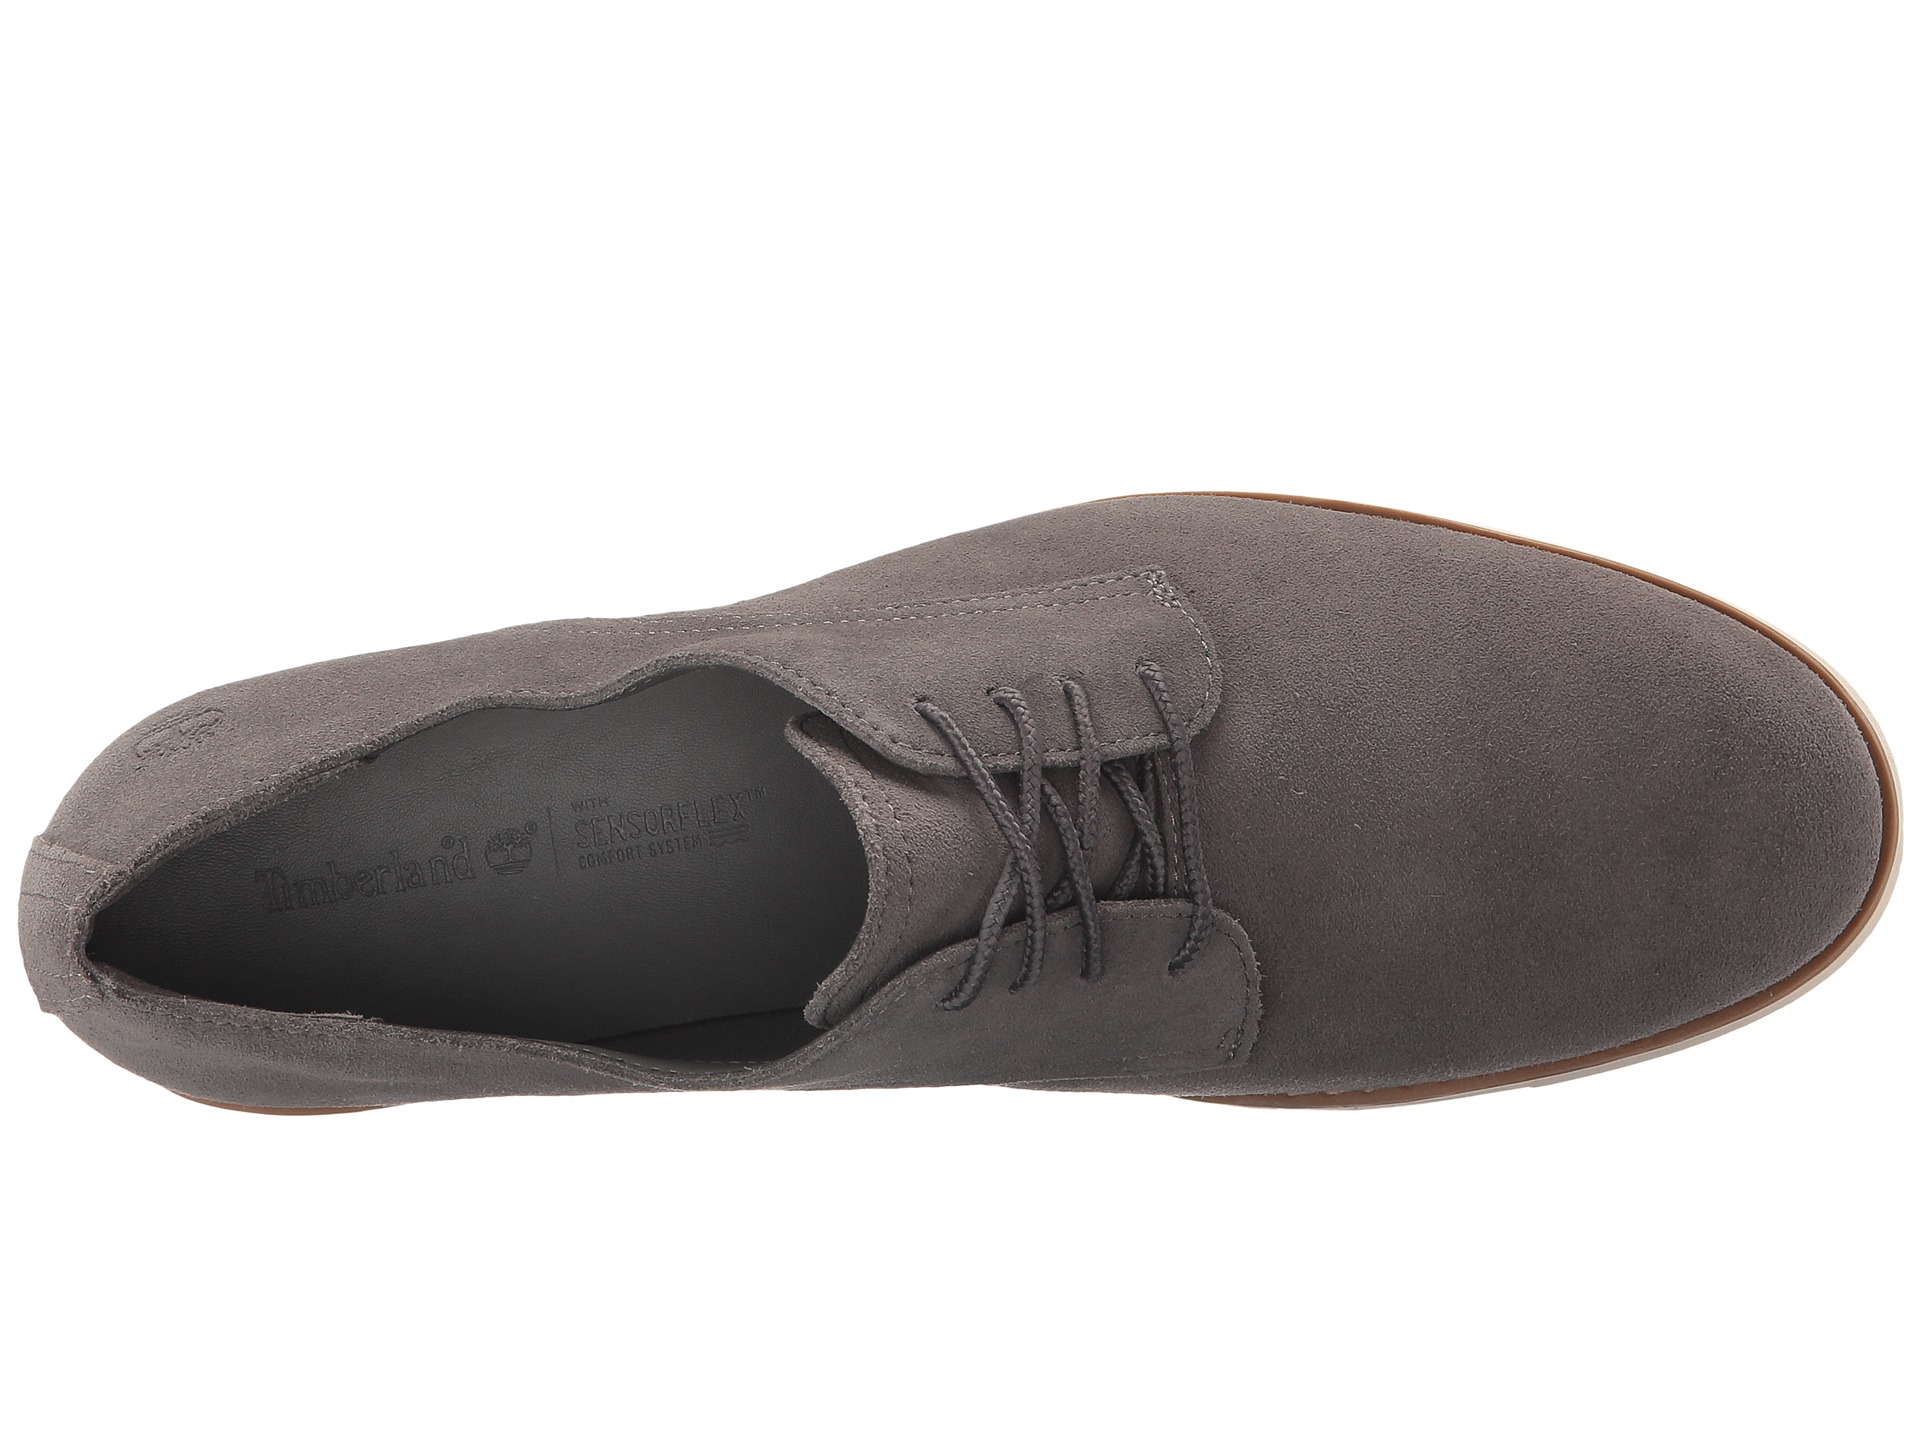 Timberland Lakeville Oxford Dark Grey Suede - Zappos.com Free Shipping ...